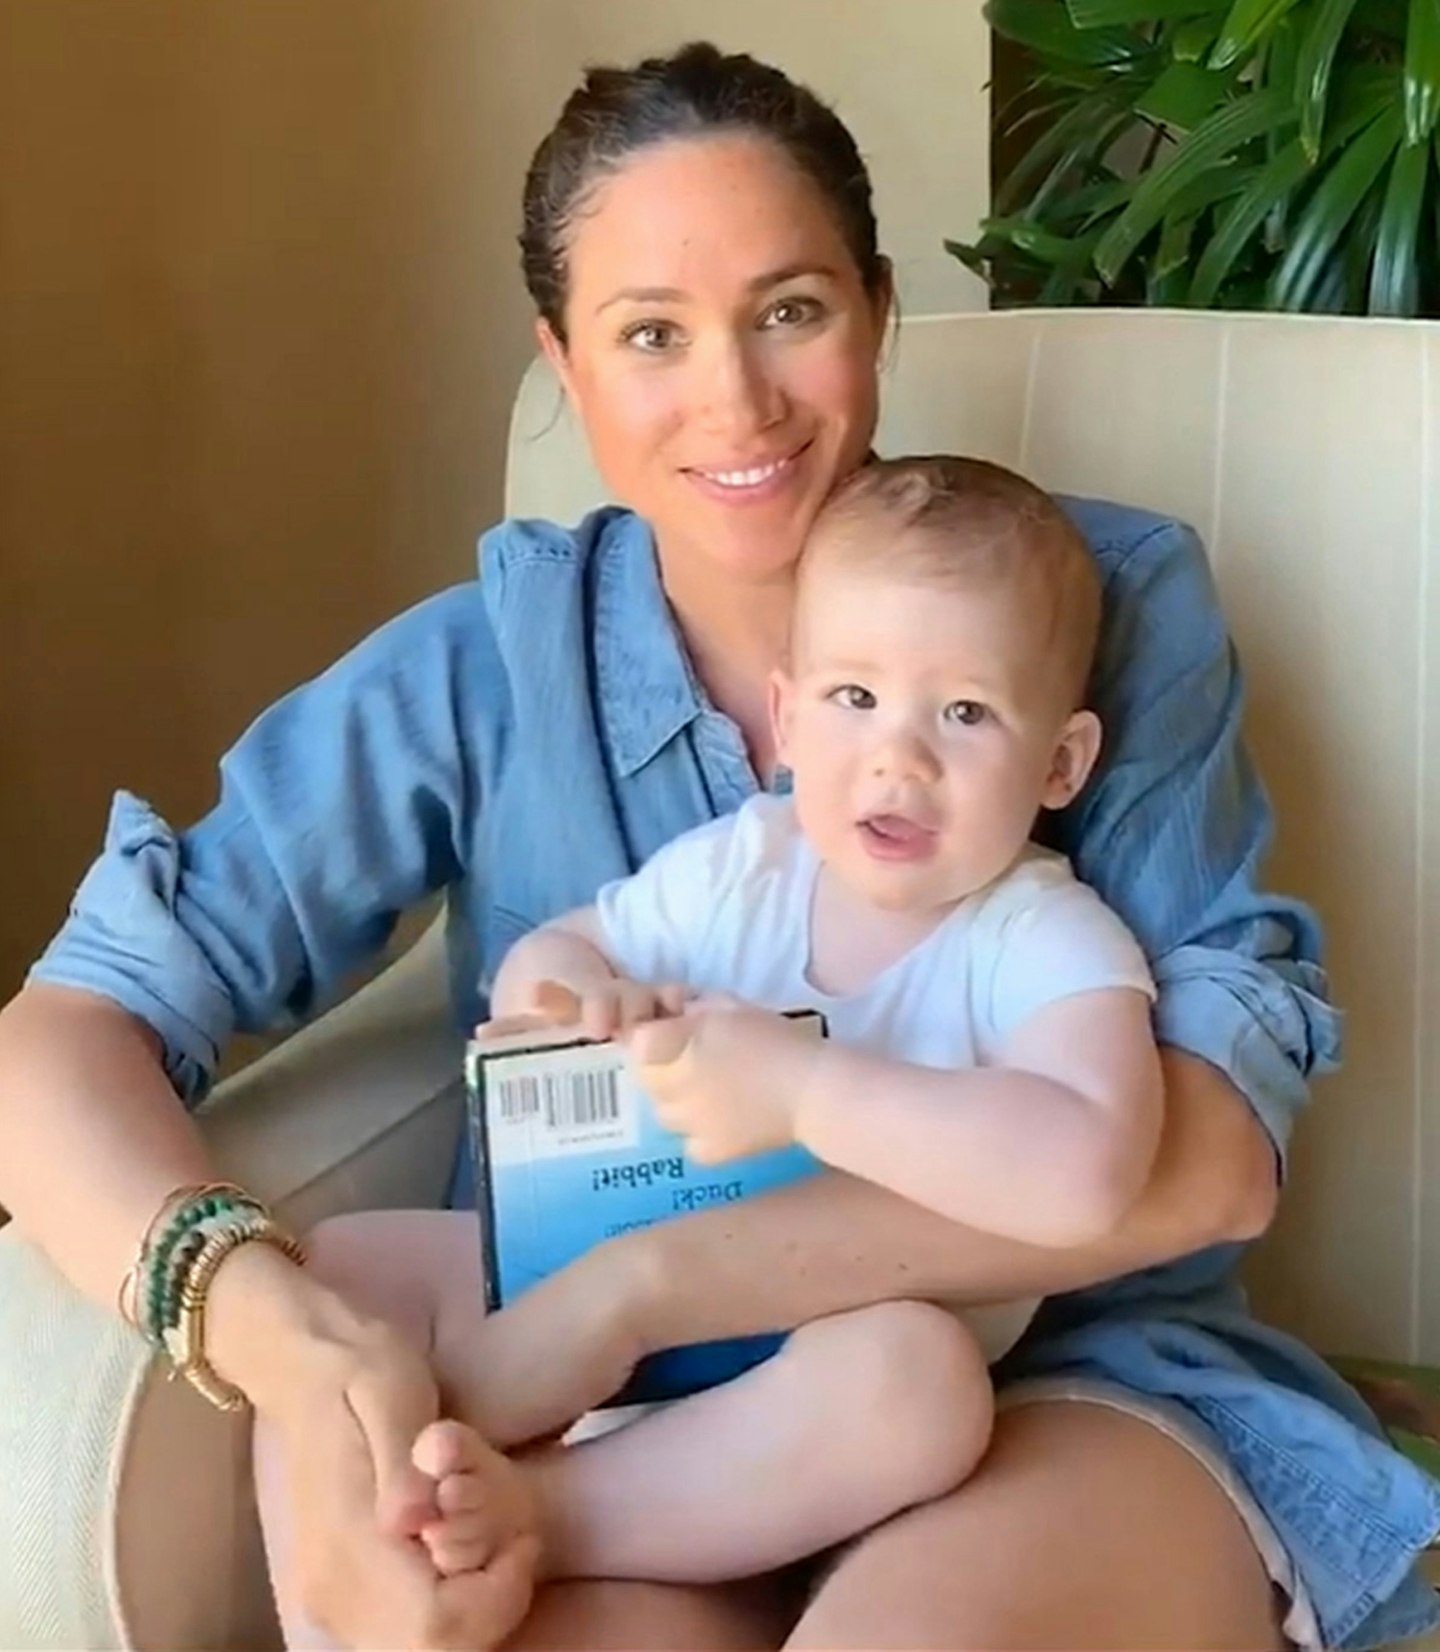 May 2020: Meghan reads to Archie on his first birthday